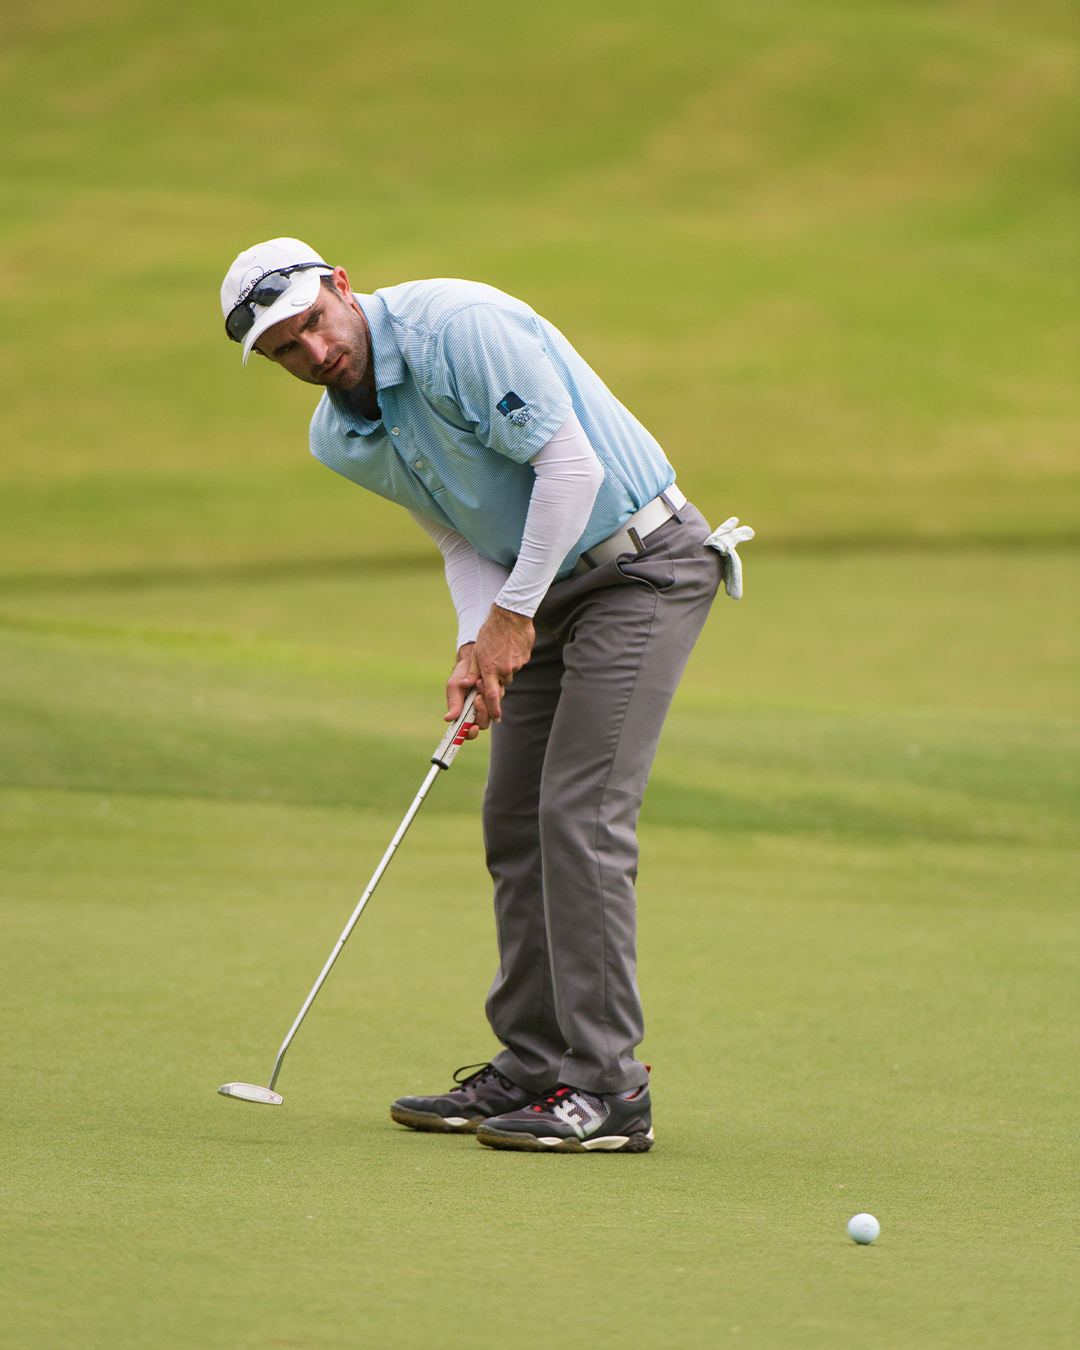 Andrew Storm makes his putt on the sixth hole during the first round for the 43rd National Car Rental Assistant PGA Professional Championship held at the PGA Golf Club on November 14, 2019 in Port St. Lucie, Florida. (Photo by Hailey Garrett/PGA of America)